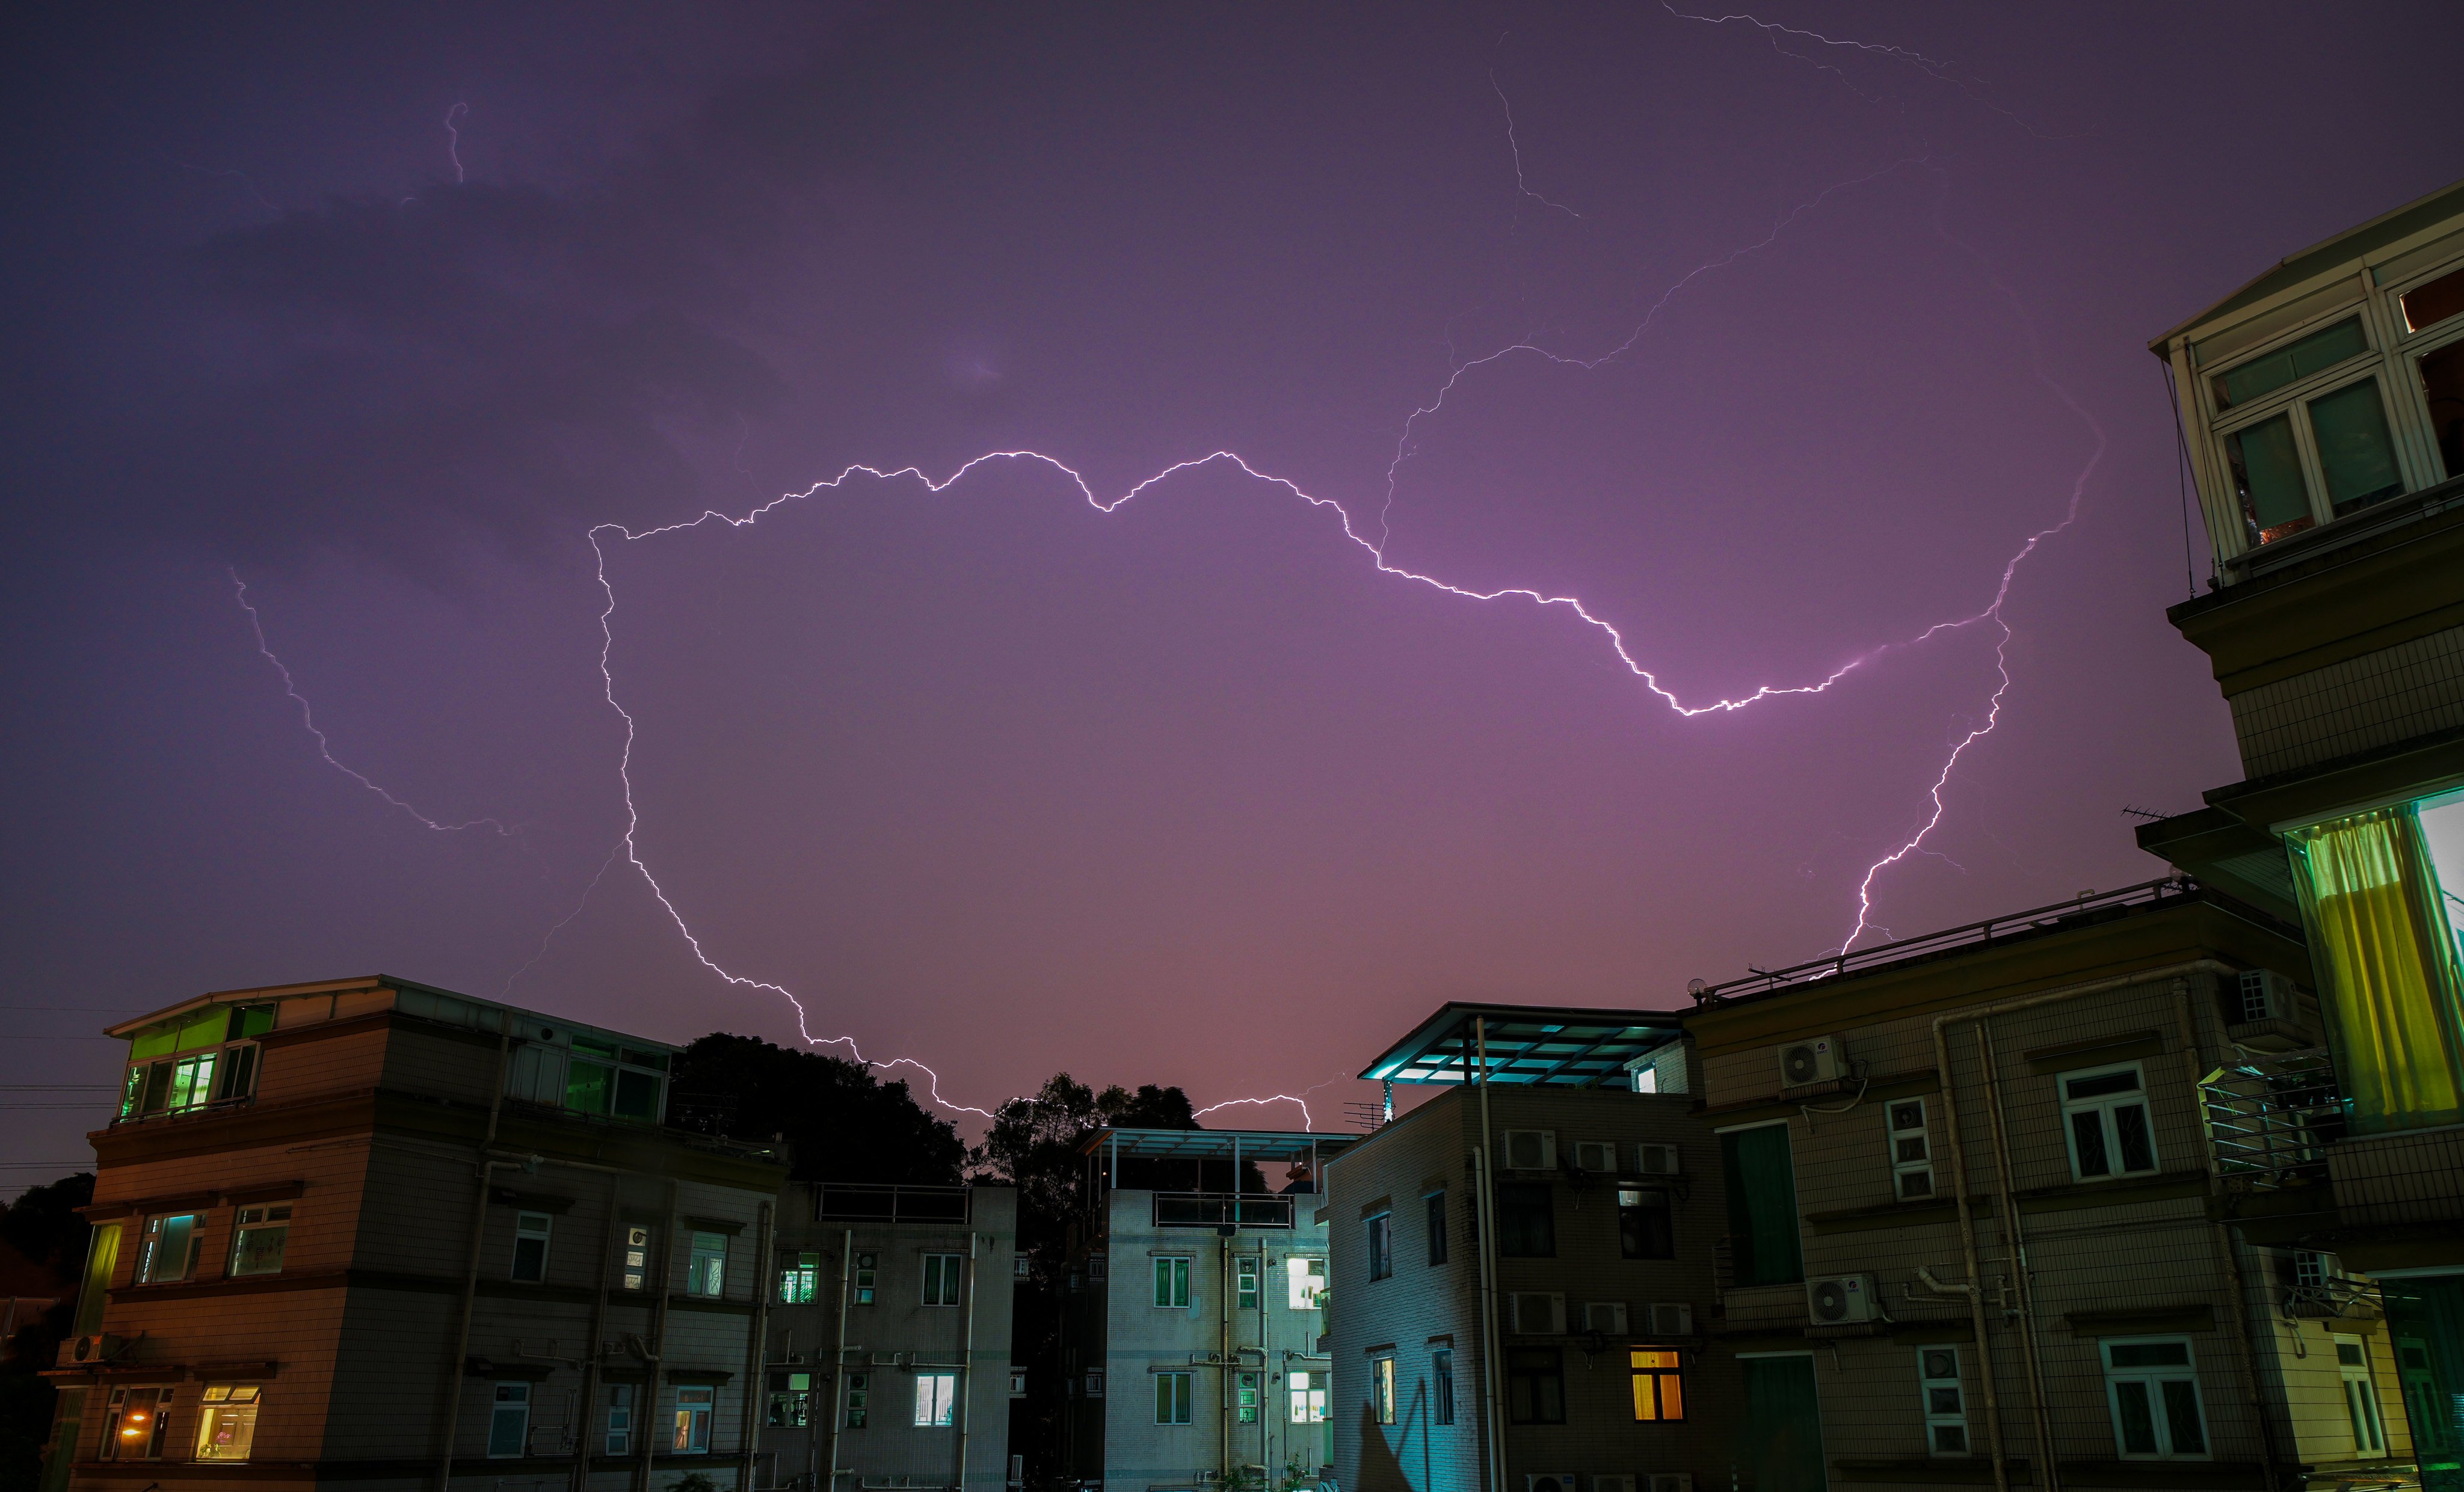 Hong Kong witnessed numerous lighting strikes on Tuesday night, including some over Tai Po. Photo: Eugene Lee